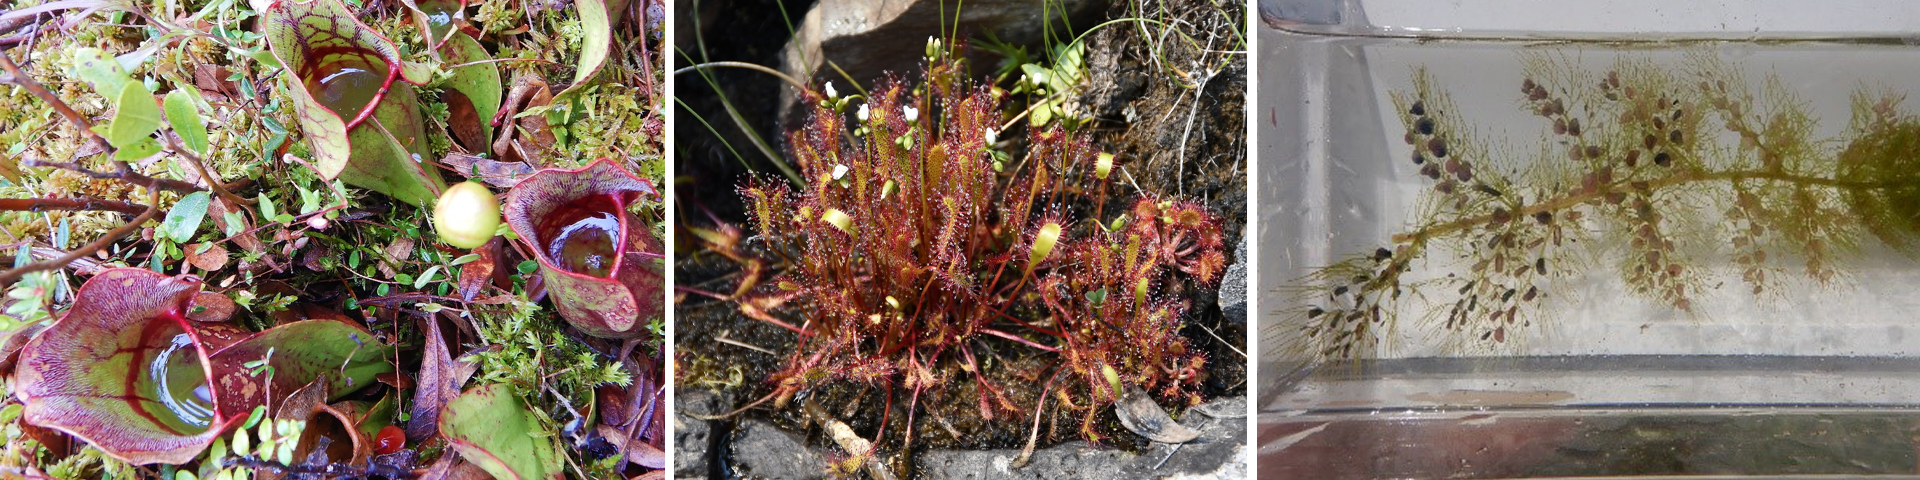 Carnivorous plants of Lakes Superior National Marine Conservation Area from left to right: Purple Pitcher Plant, Great Sundew, and Common Bladderwort.